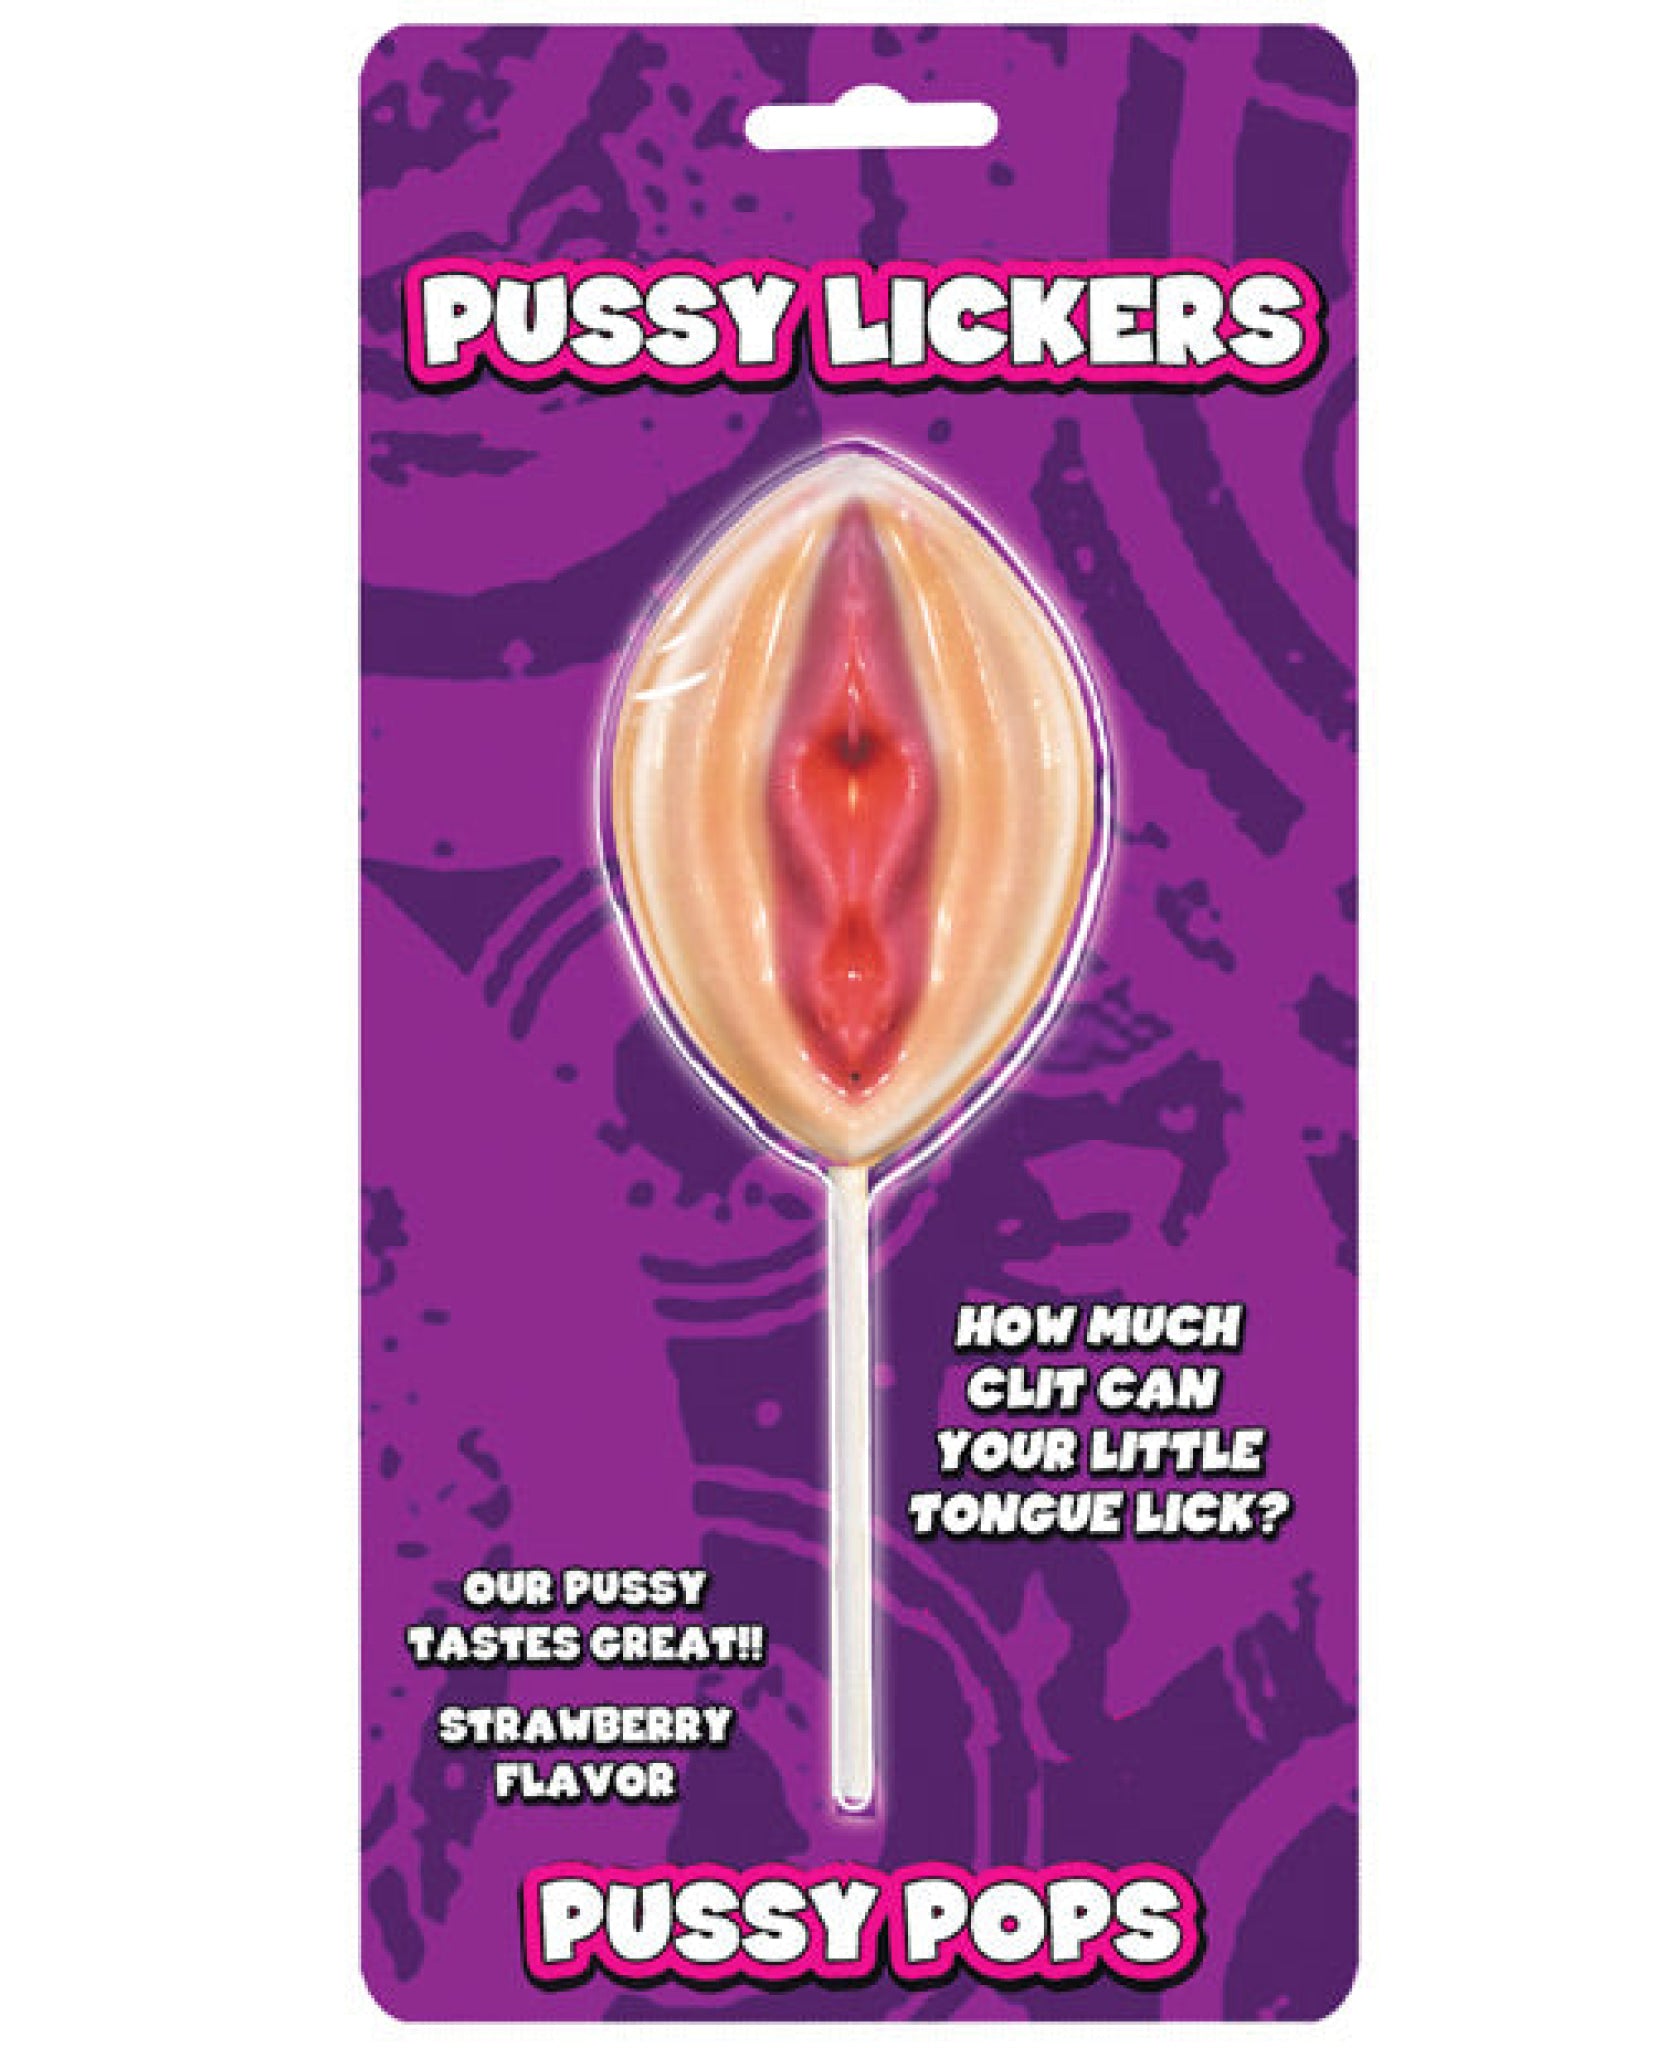 Pussy Lickers Pussy Pops Hott Products